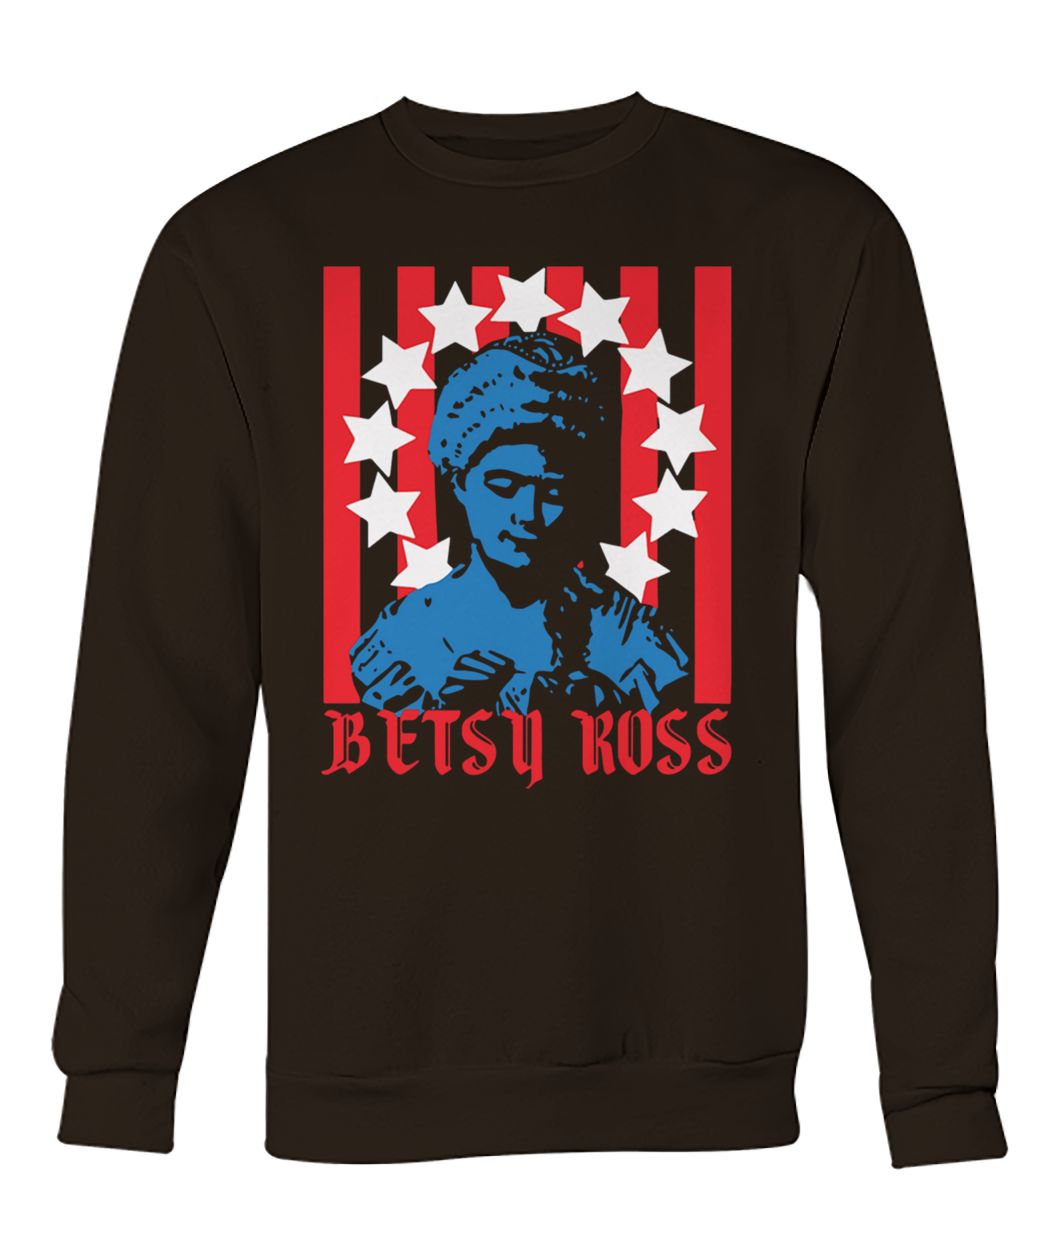 Betsy ross making the first american flag crew neck sweatshirt